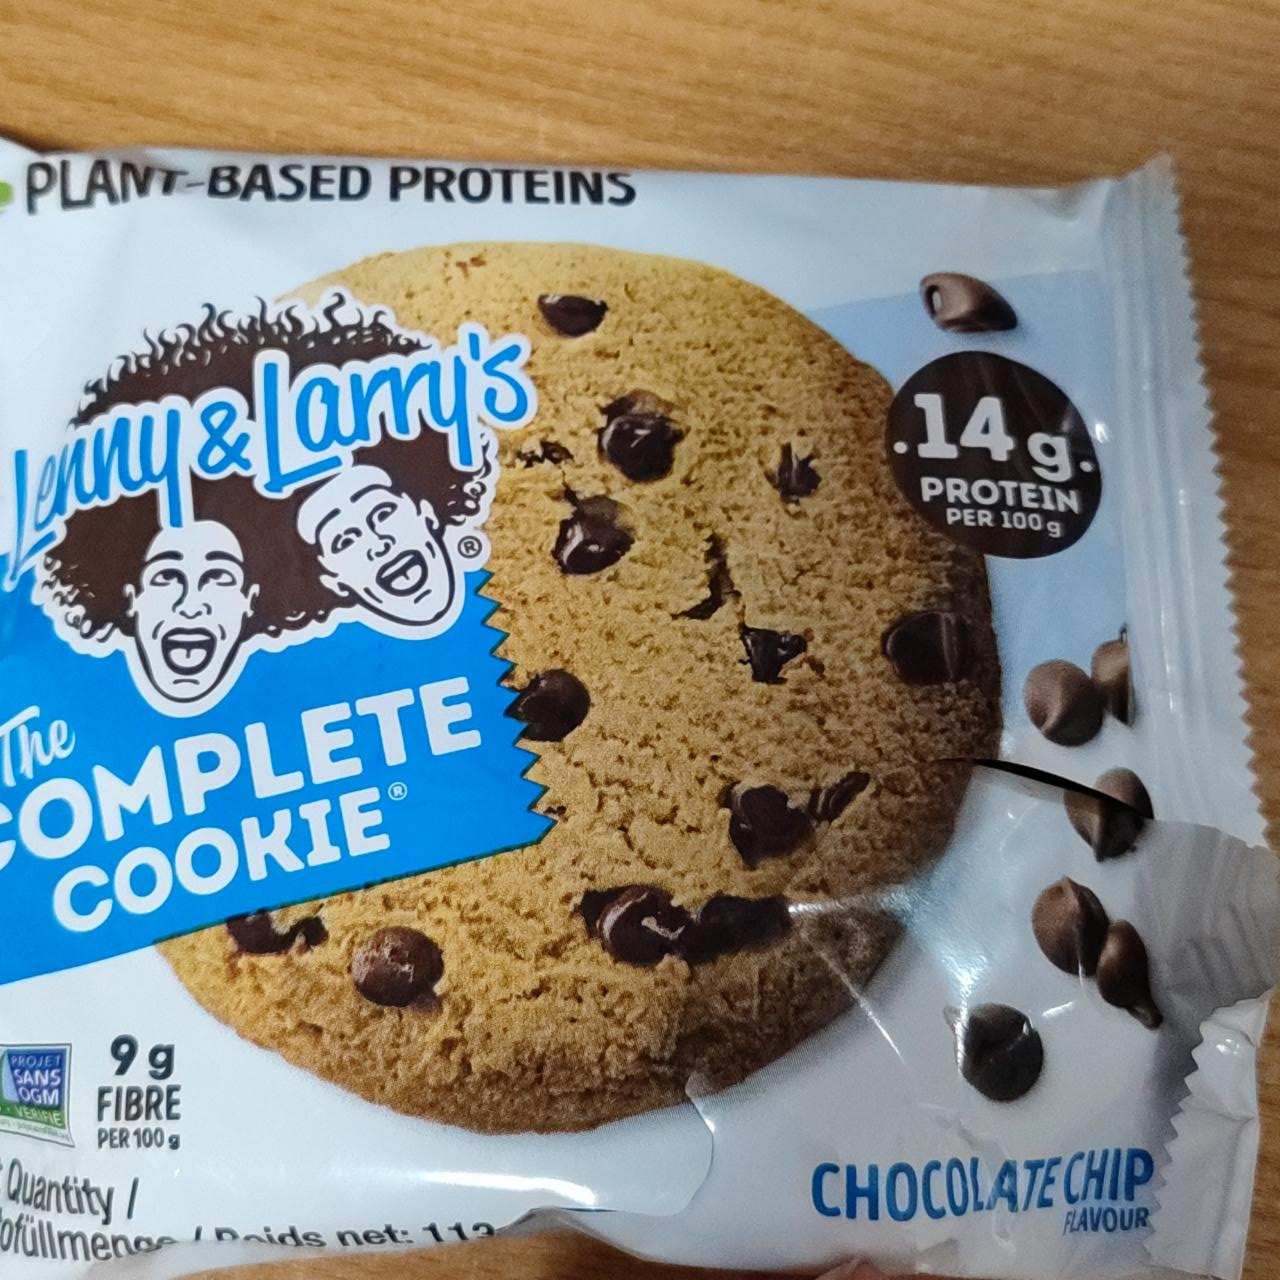 Fotografie - The Complete Cookie Chocolate chip 14g Protein Lenny&Larry's